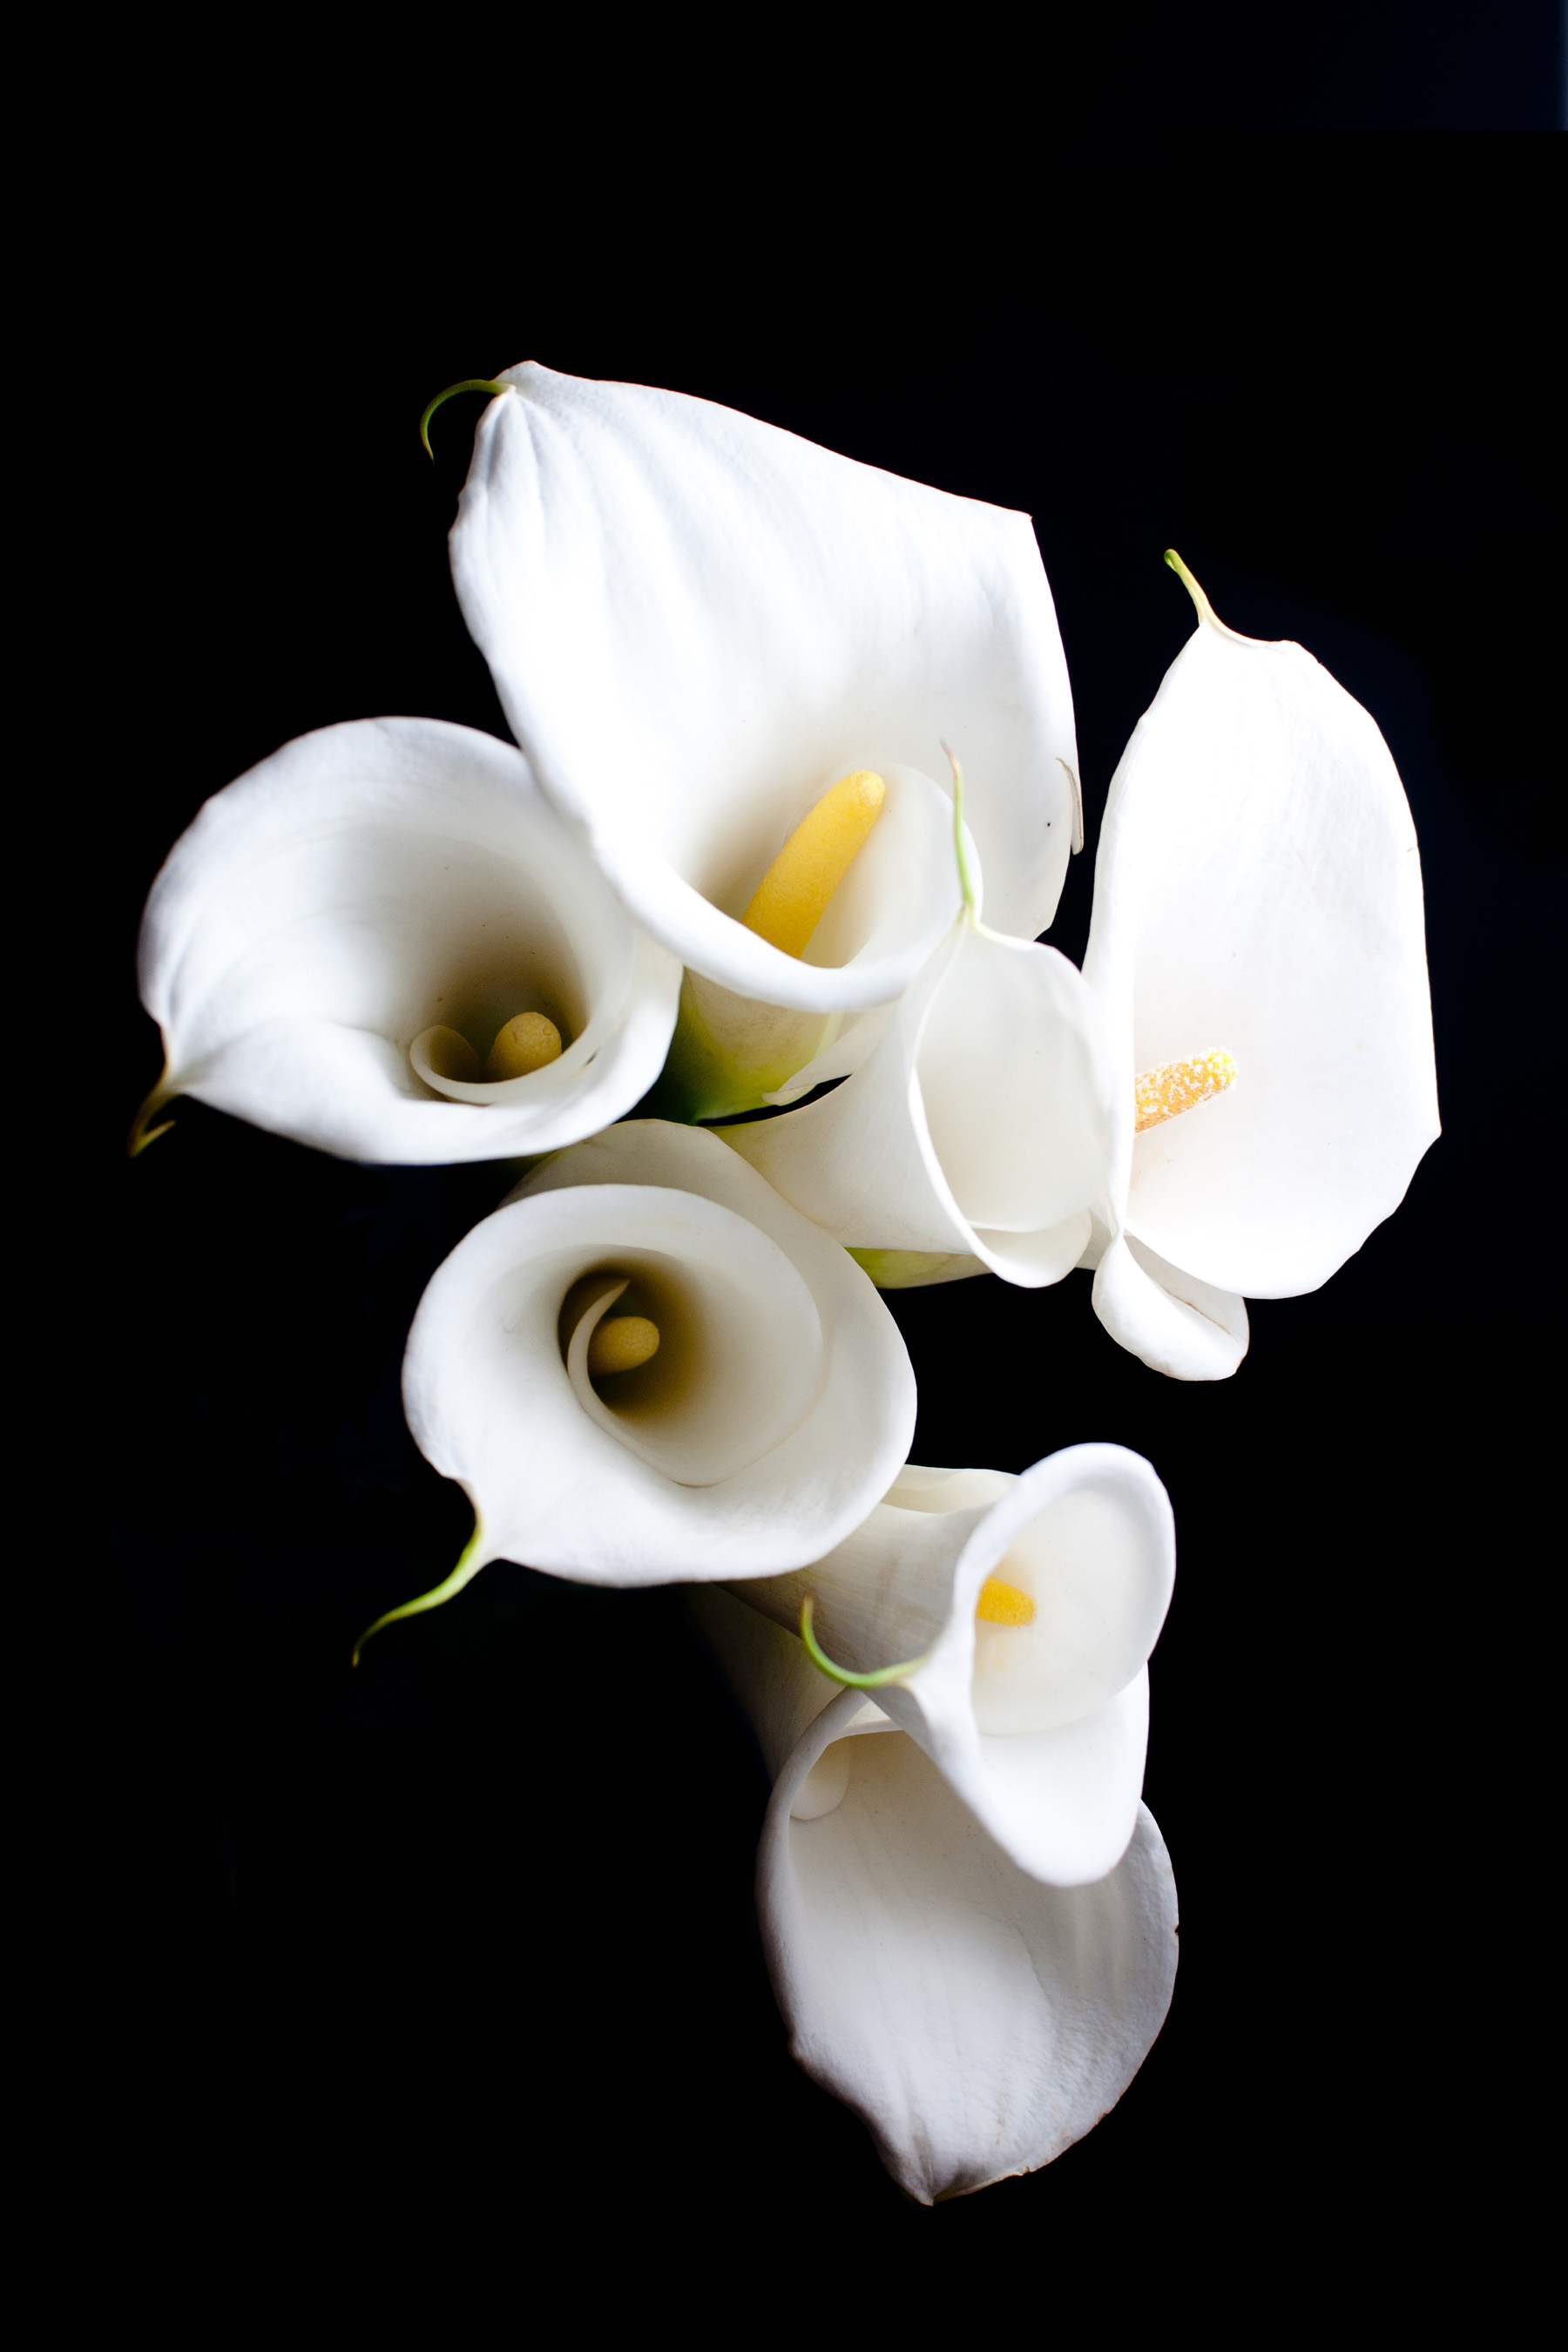 White calla lily flower close-up 52016 - Flowers photo - Flowers